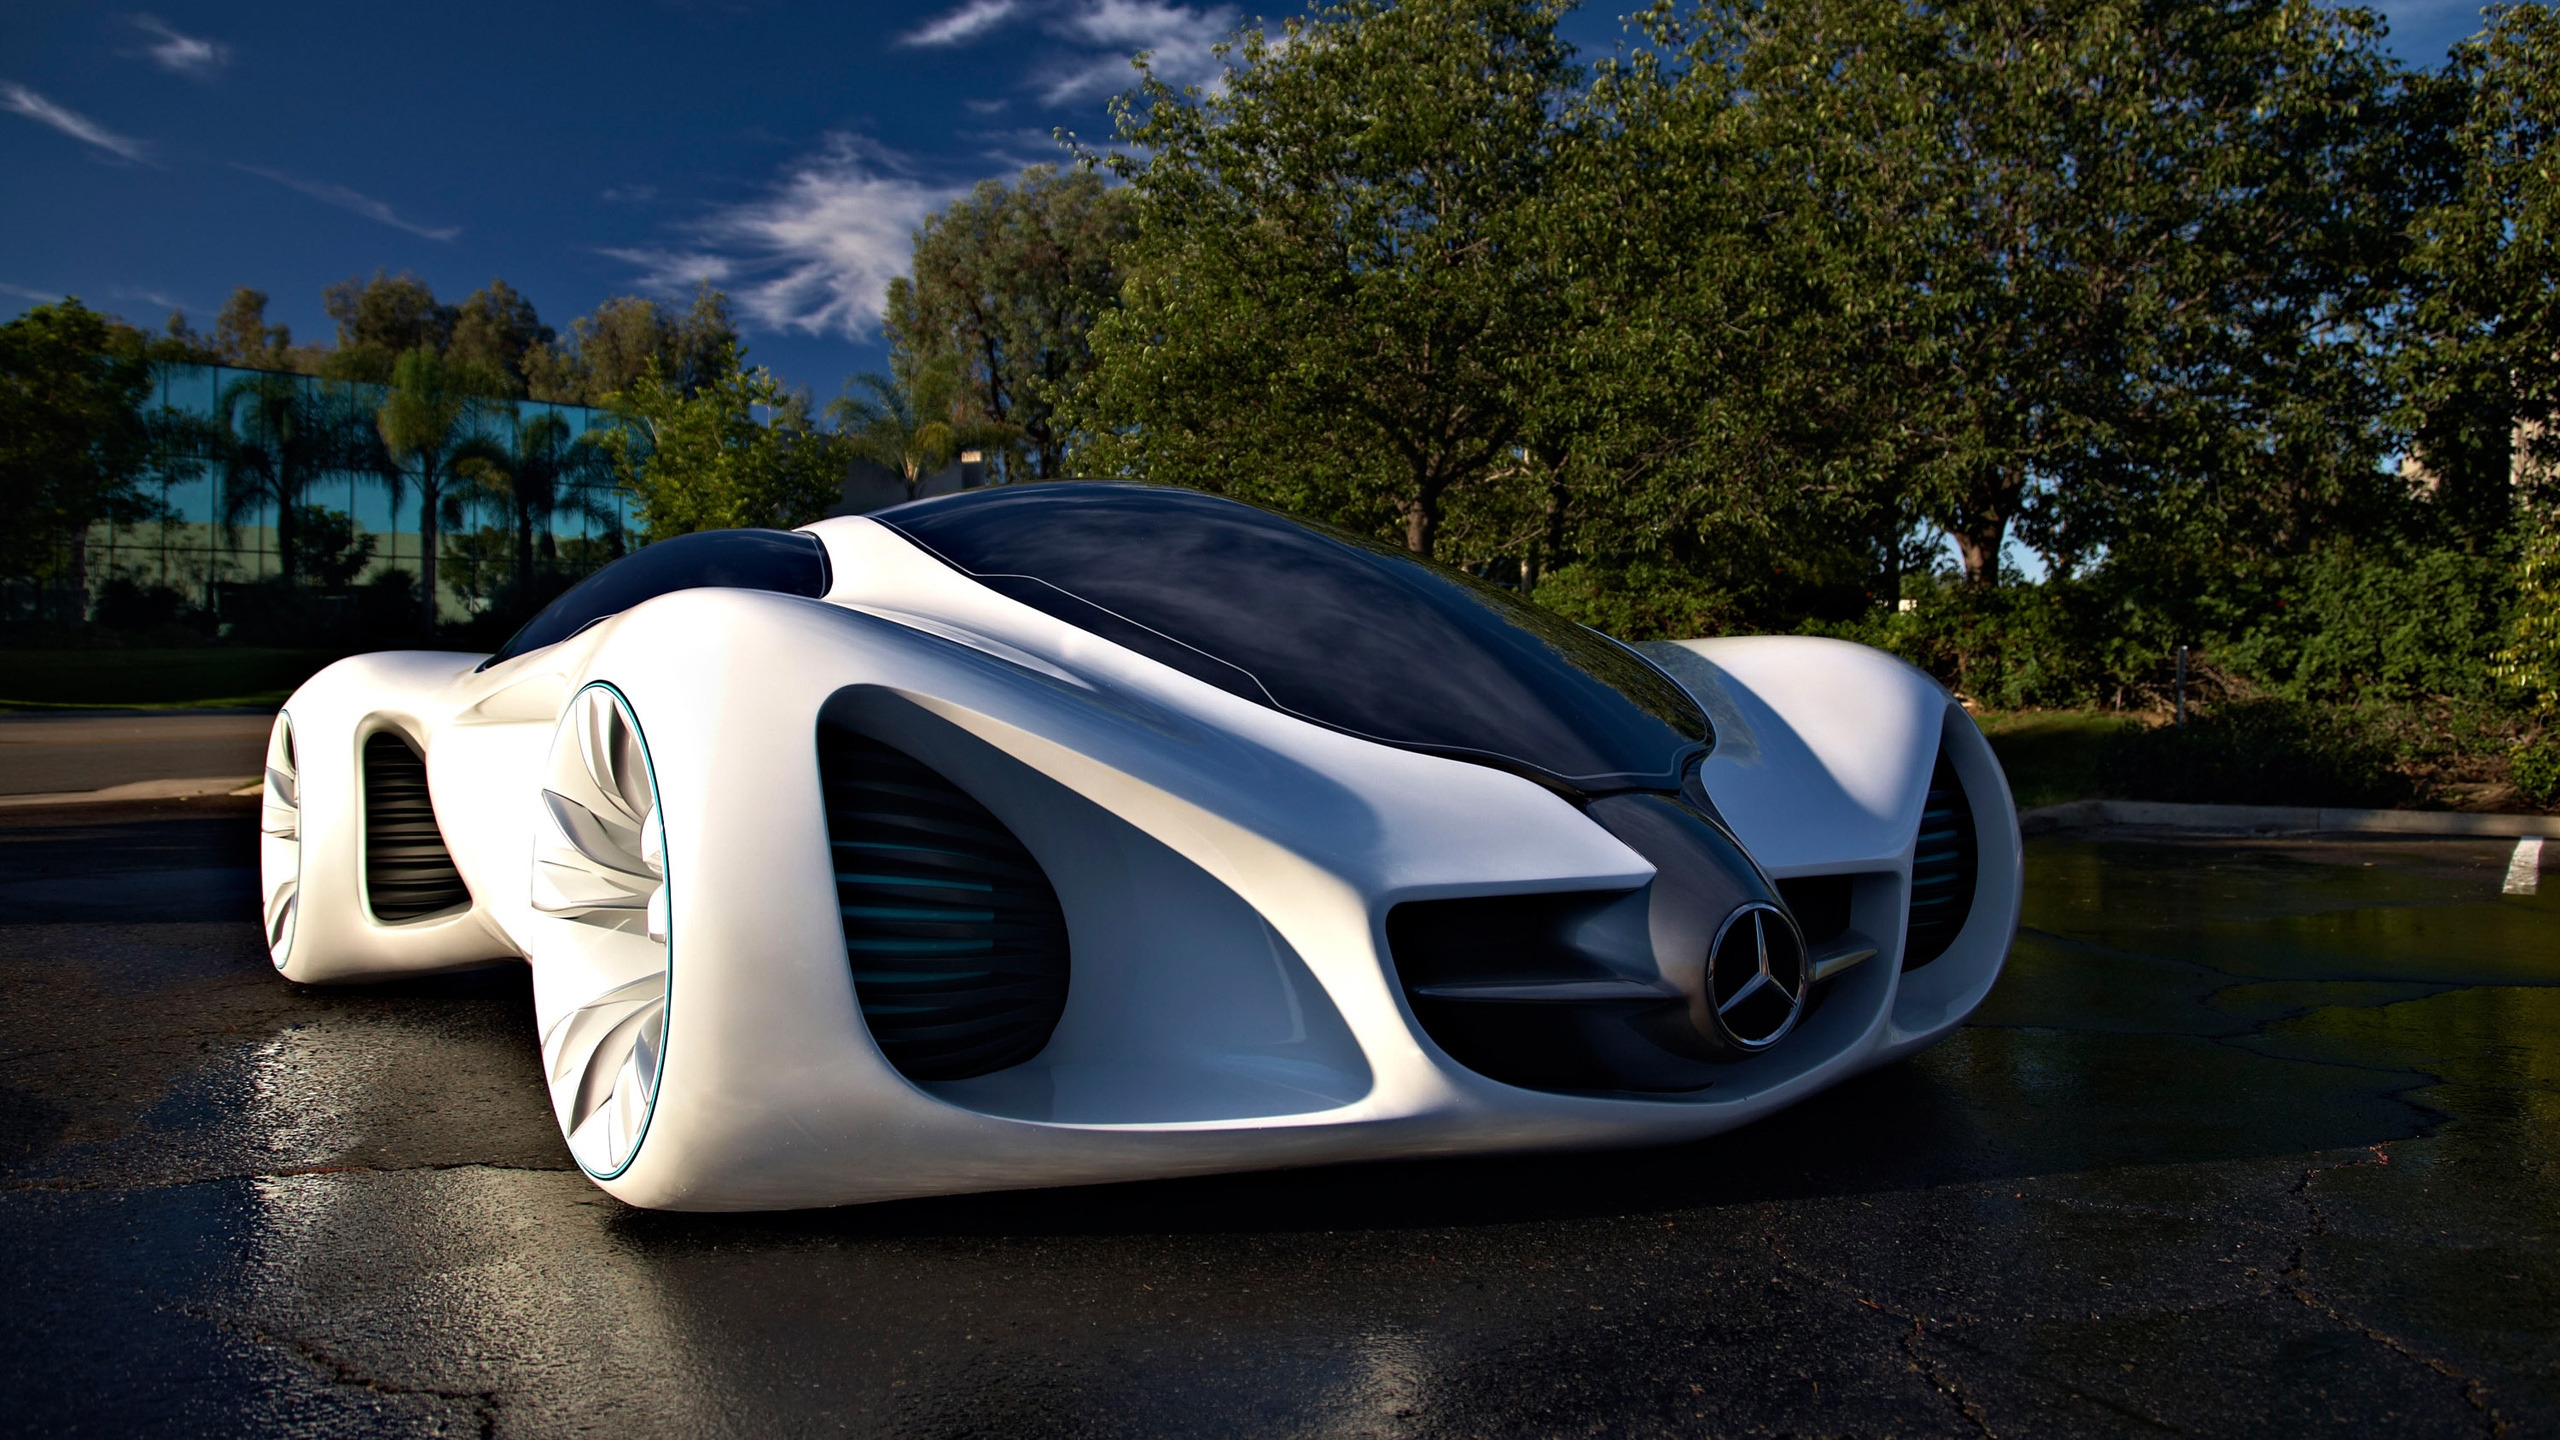 Mercedes Benz Biome for 2560x1440 HDTV resolution